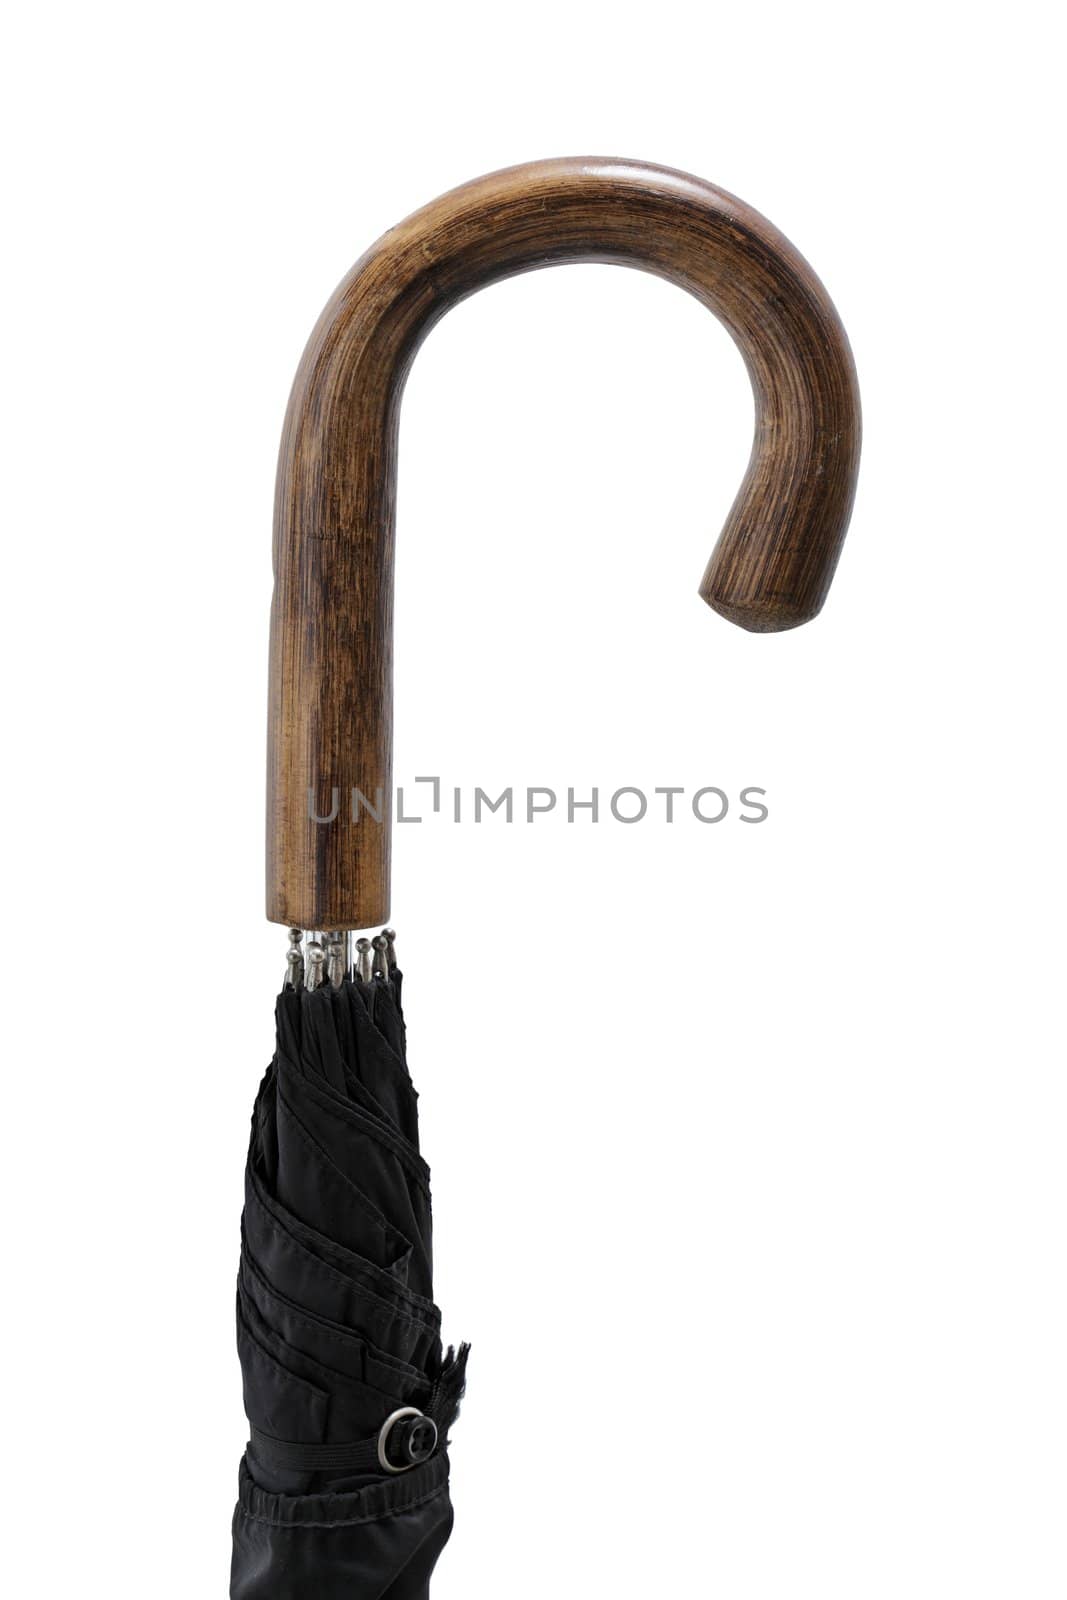 Old wooden umbrella handle against white background.